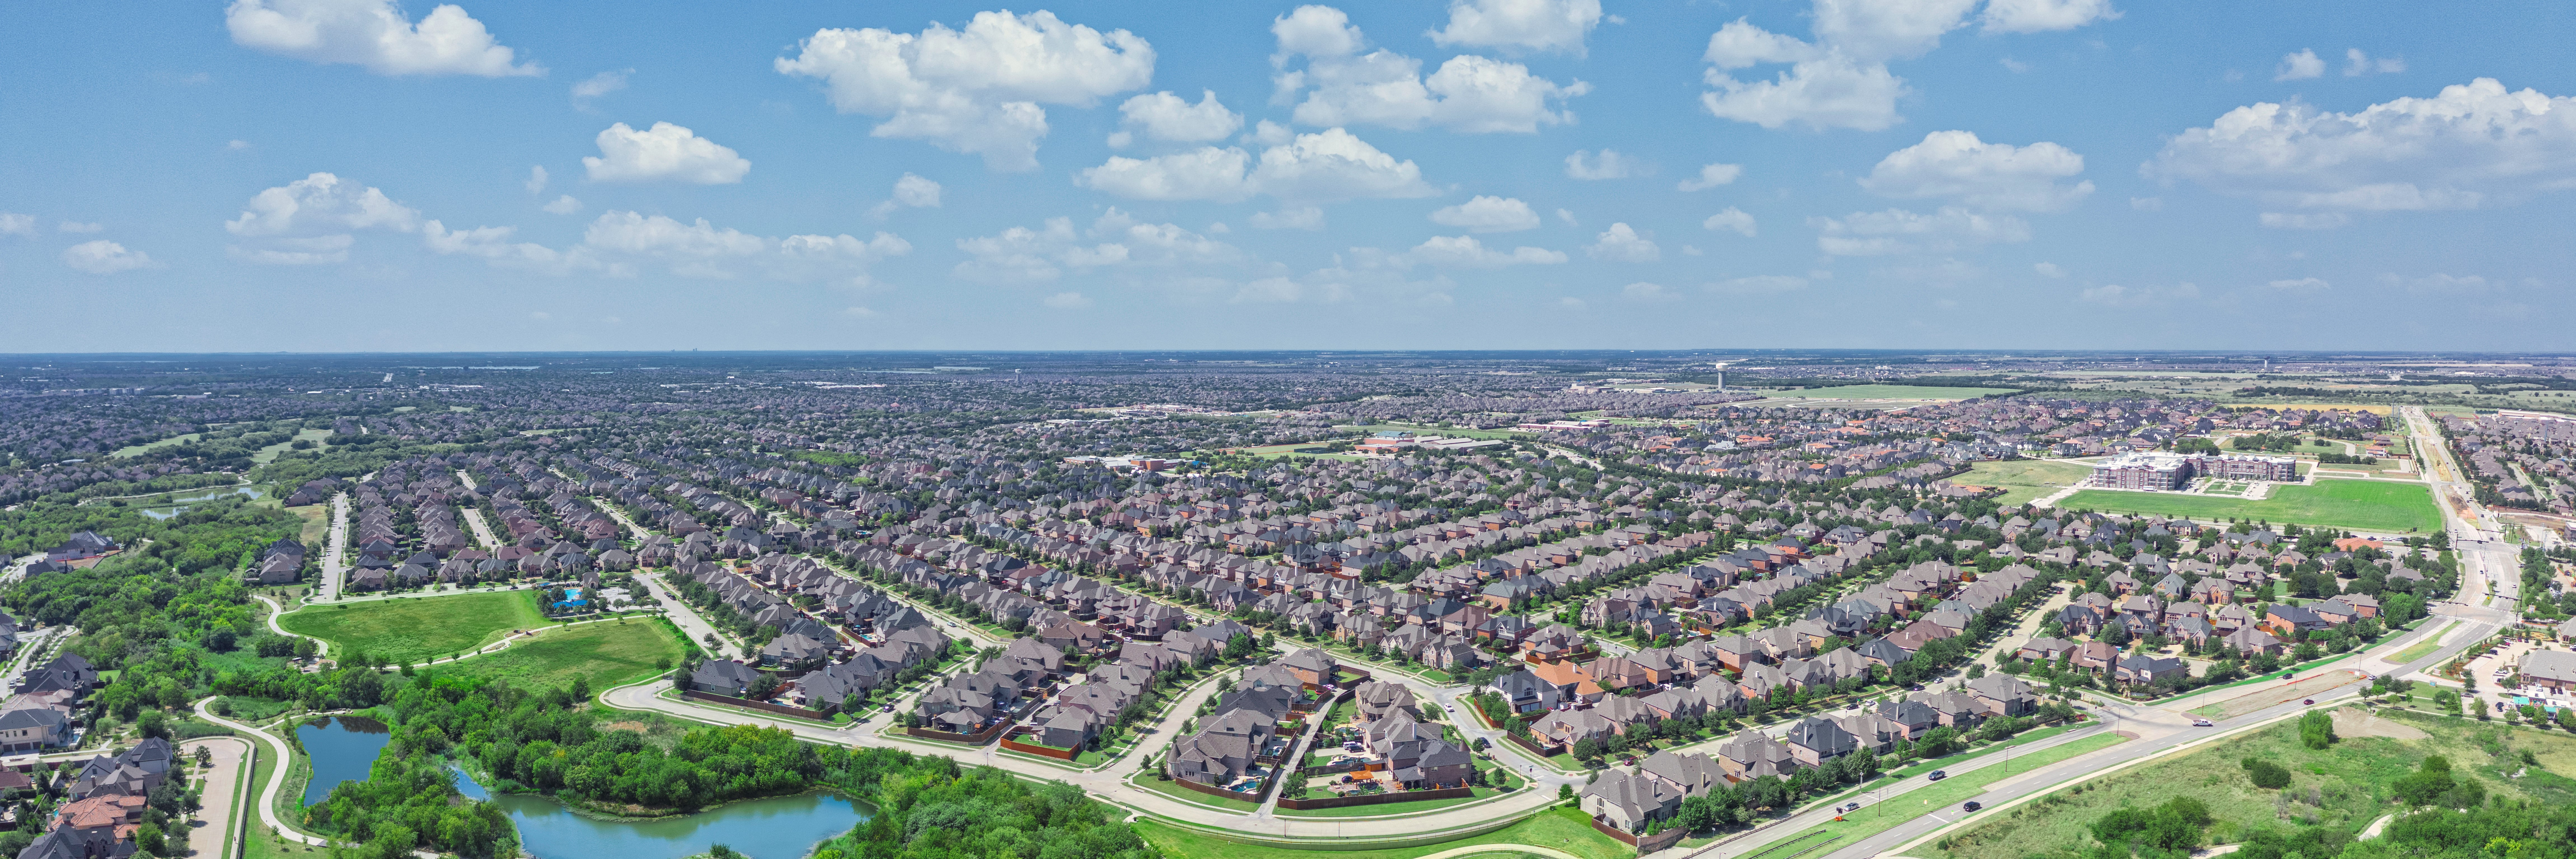 Aerial image with a large residential neighborhood and a park with walking trails.